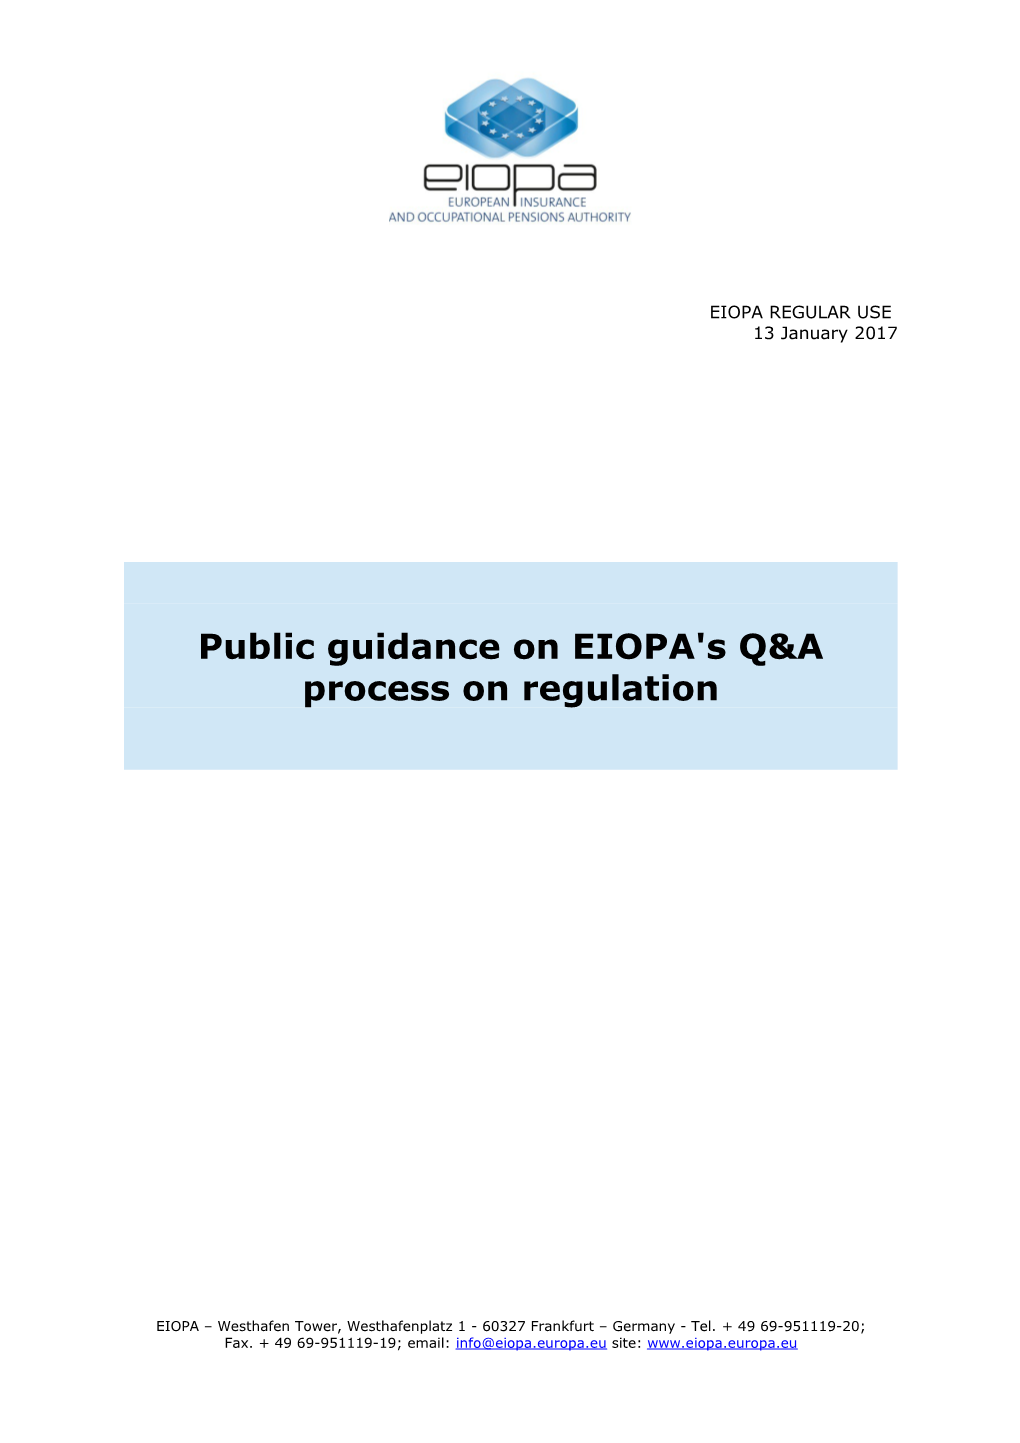 Public Guidance on EIOPA's Q&A Process on Regulation